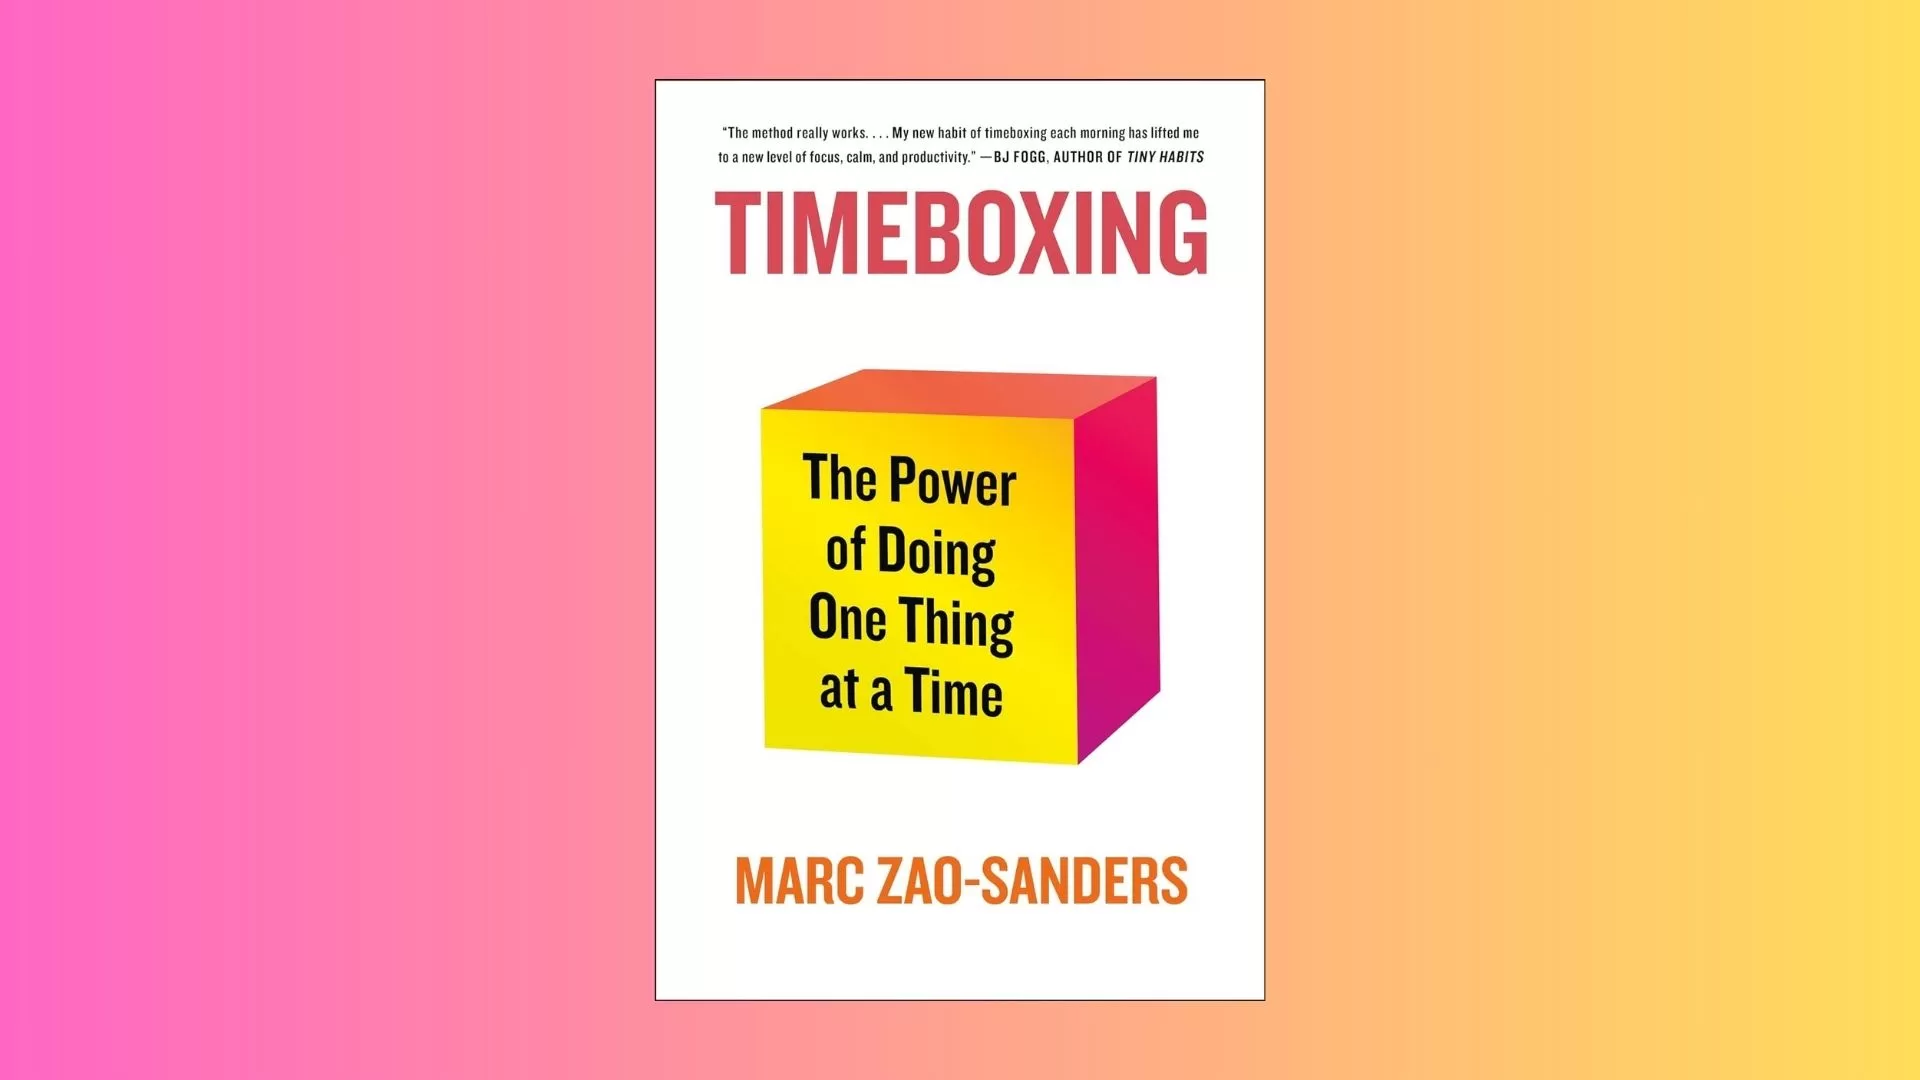 timeboxing by Marc Zao-Sanders